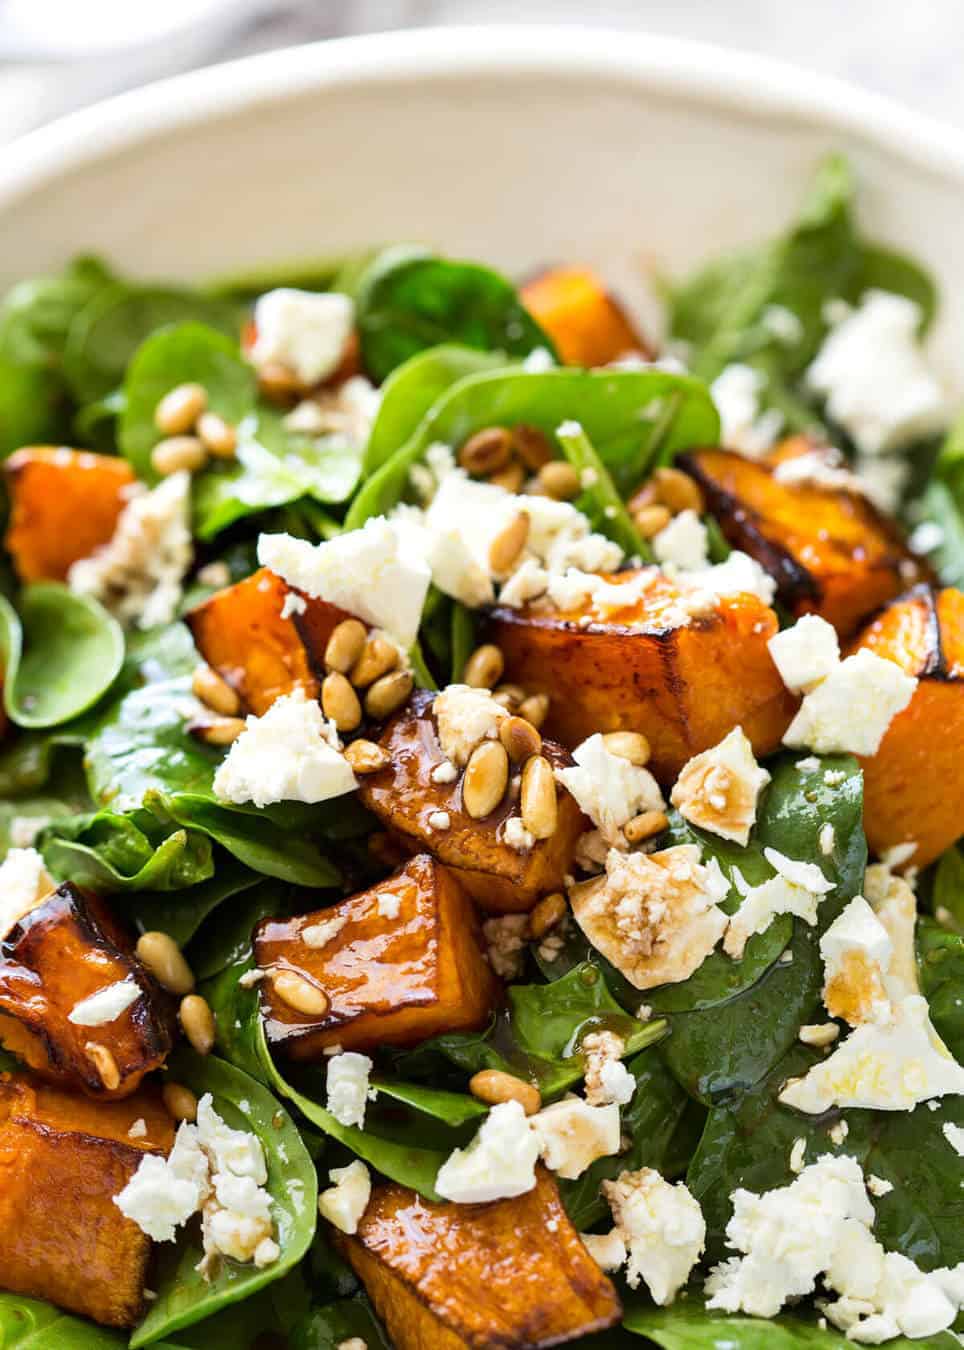 This Roast Pumpkin, Spinach and Feta Salad with a Honey Balsamic Dressing is a magical combination. Terrific side or as a meal. www.recipetineats.com